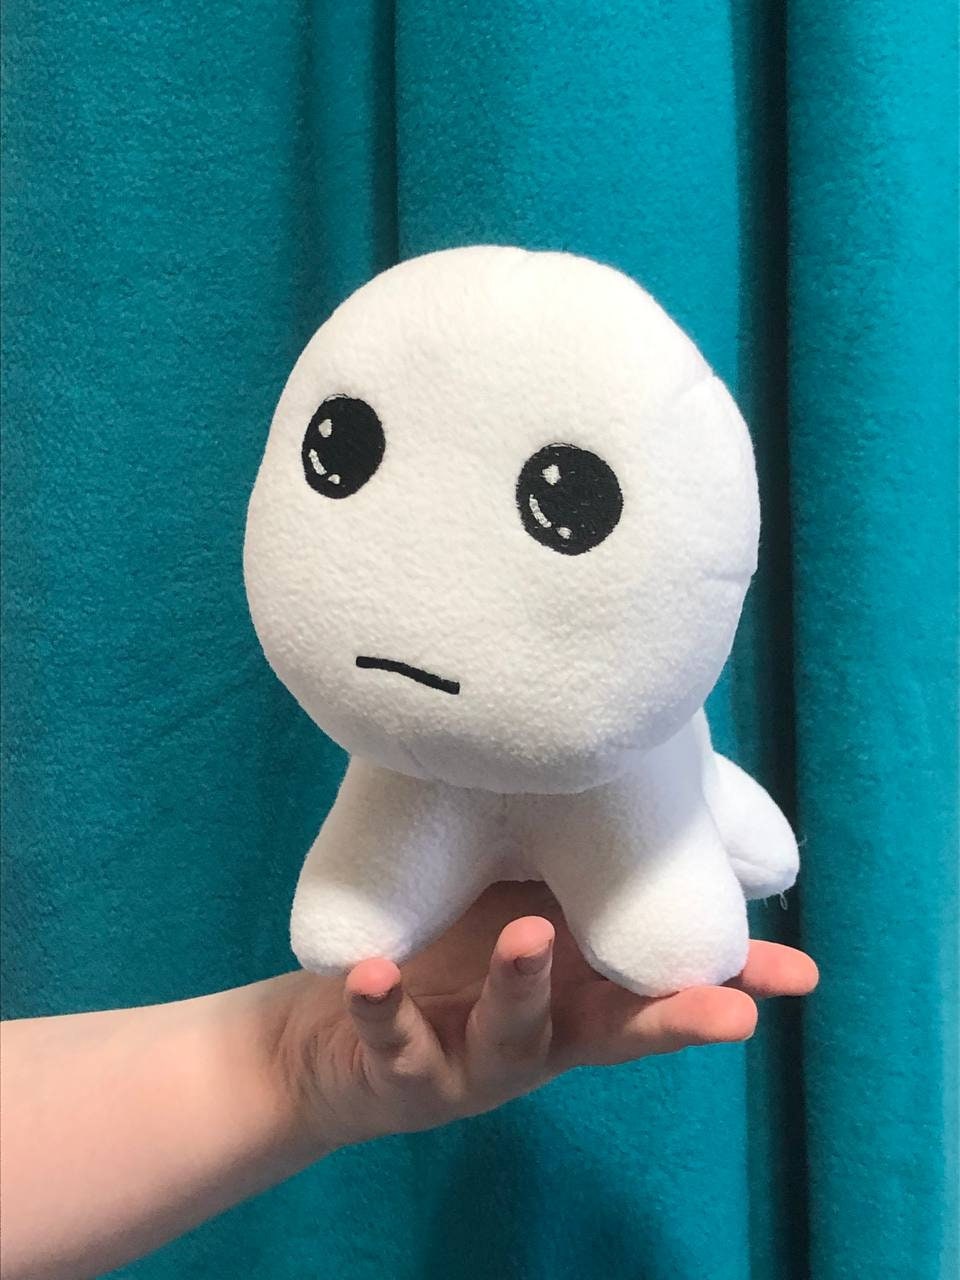 Buy CAMBAZ Autism Creature Plush Toy 8.66 White Yippee TBH